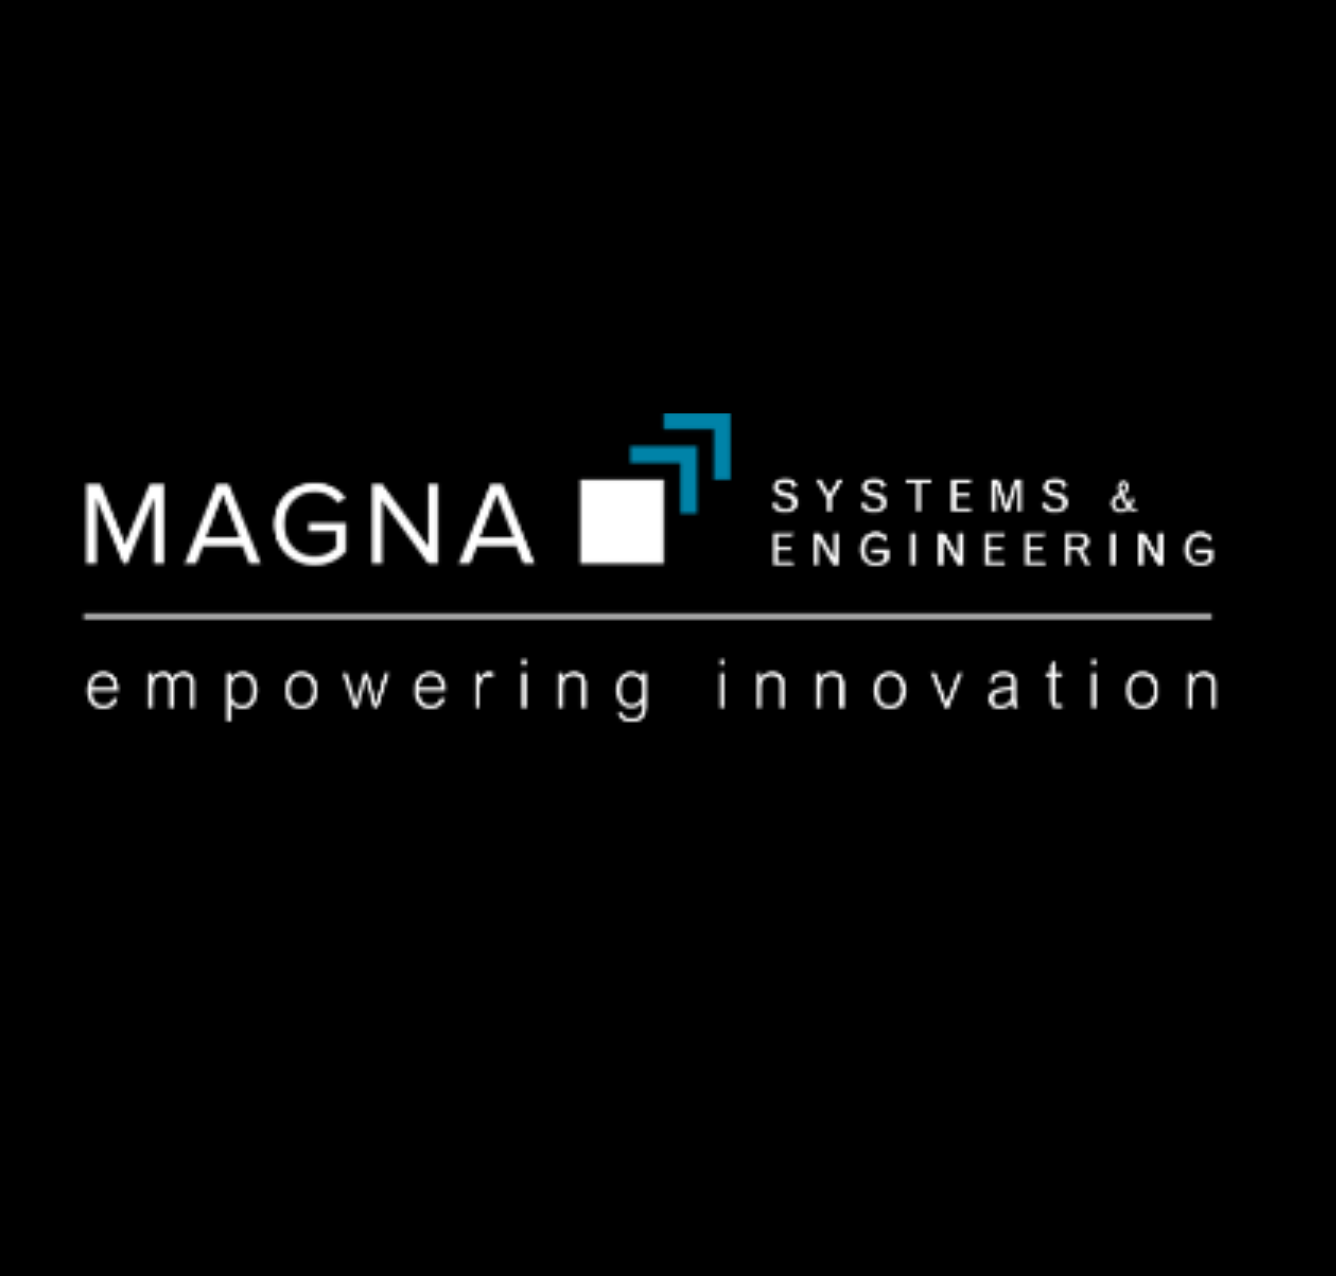 Magna Systems & Engineering image